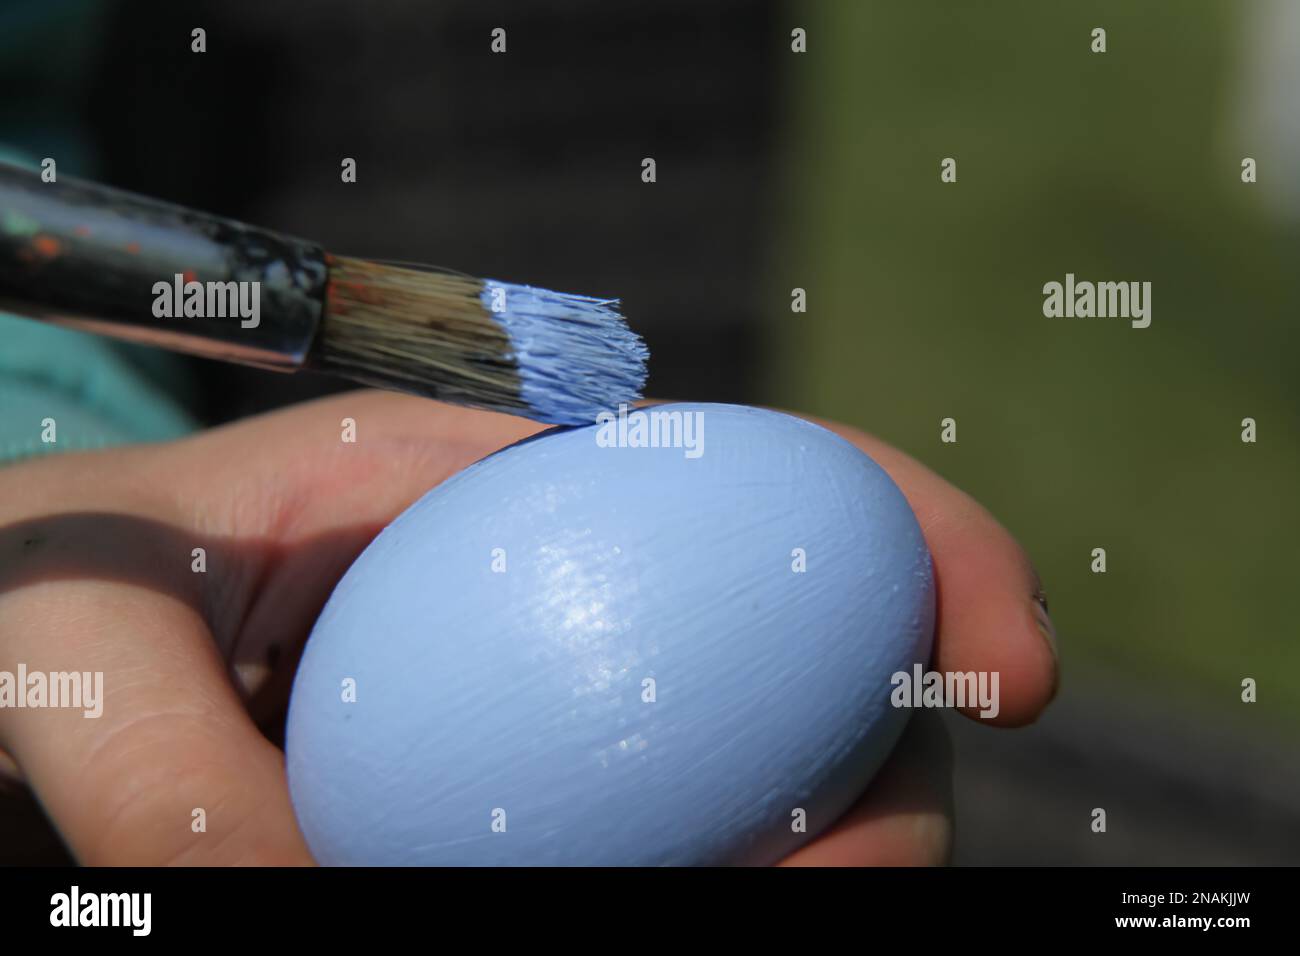 Painting a real egg with blue paint for Easter with paintbrush, crafting, UK Stock Photo